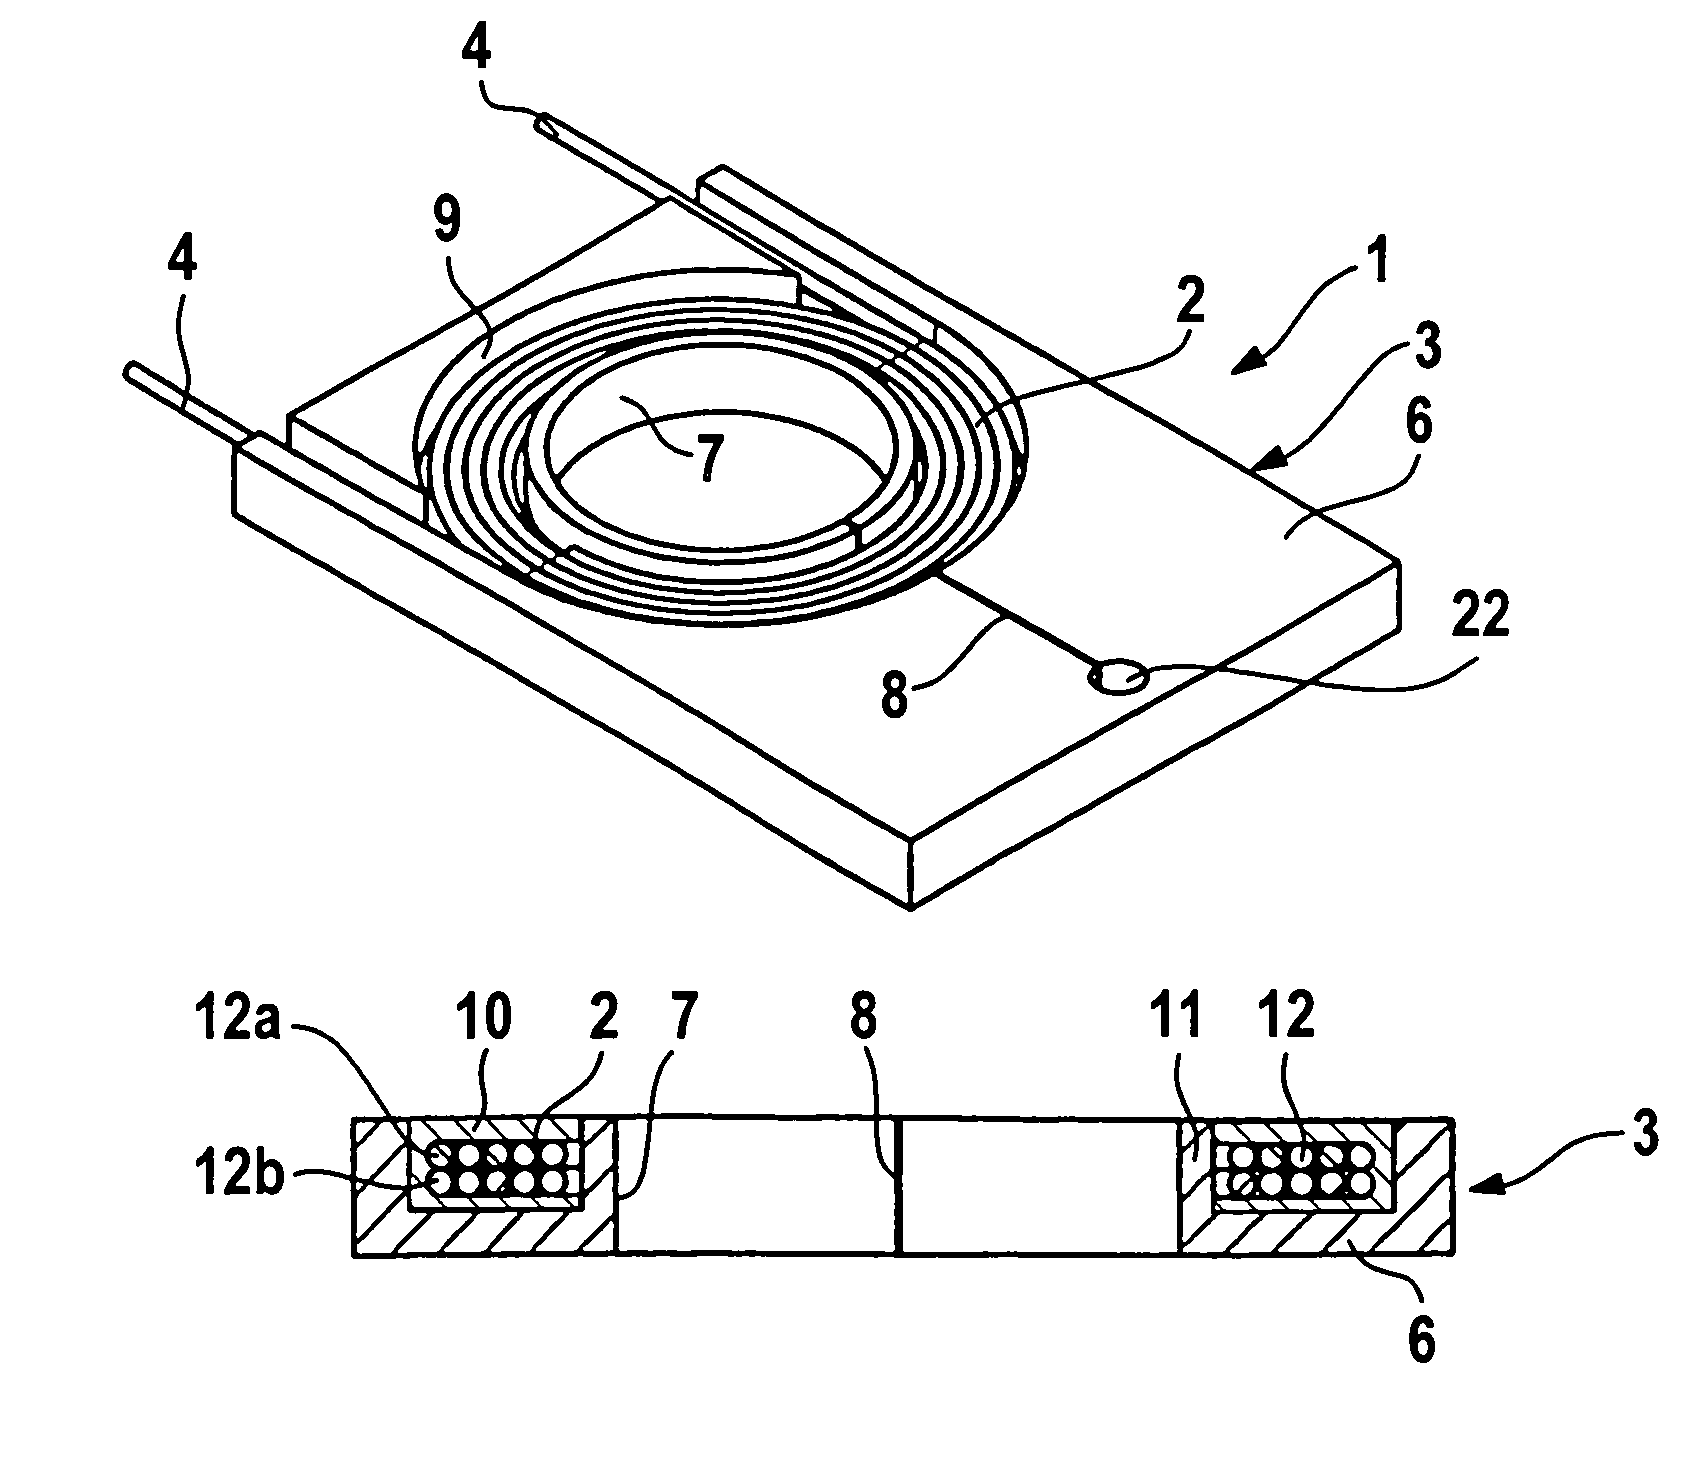 Transformer for producing high electrical currents